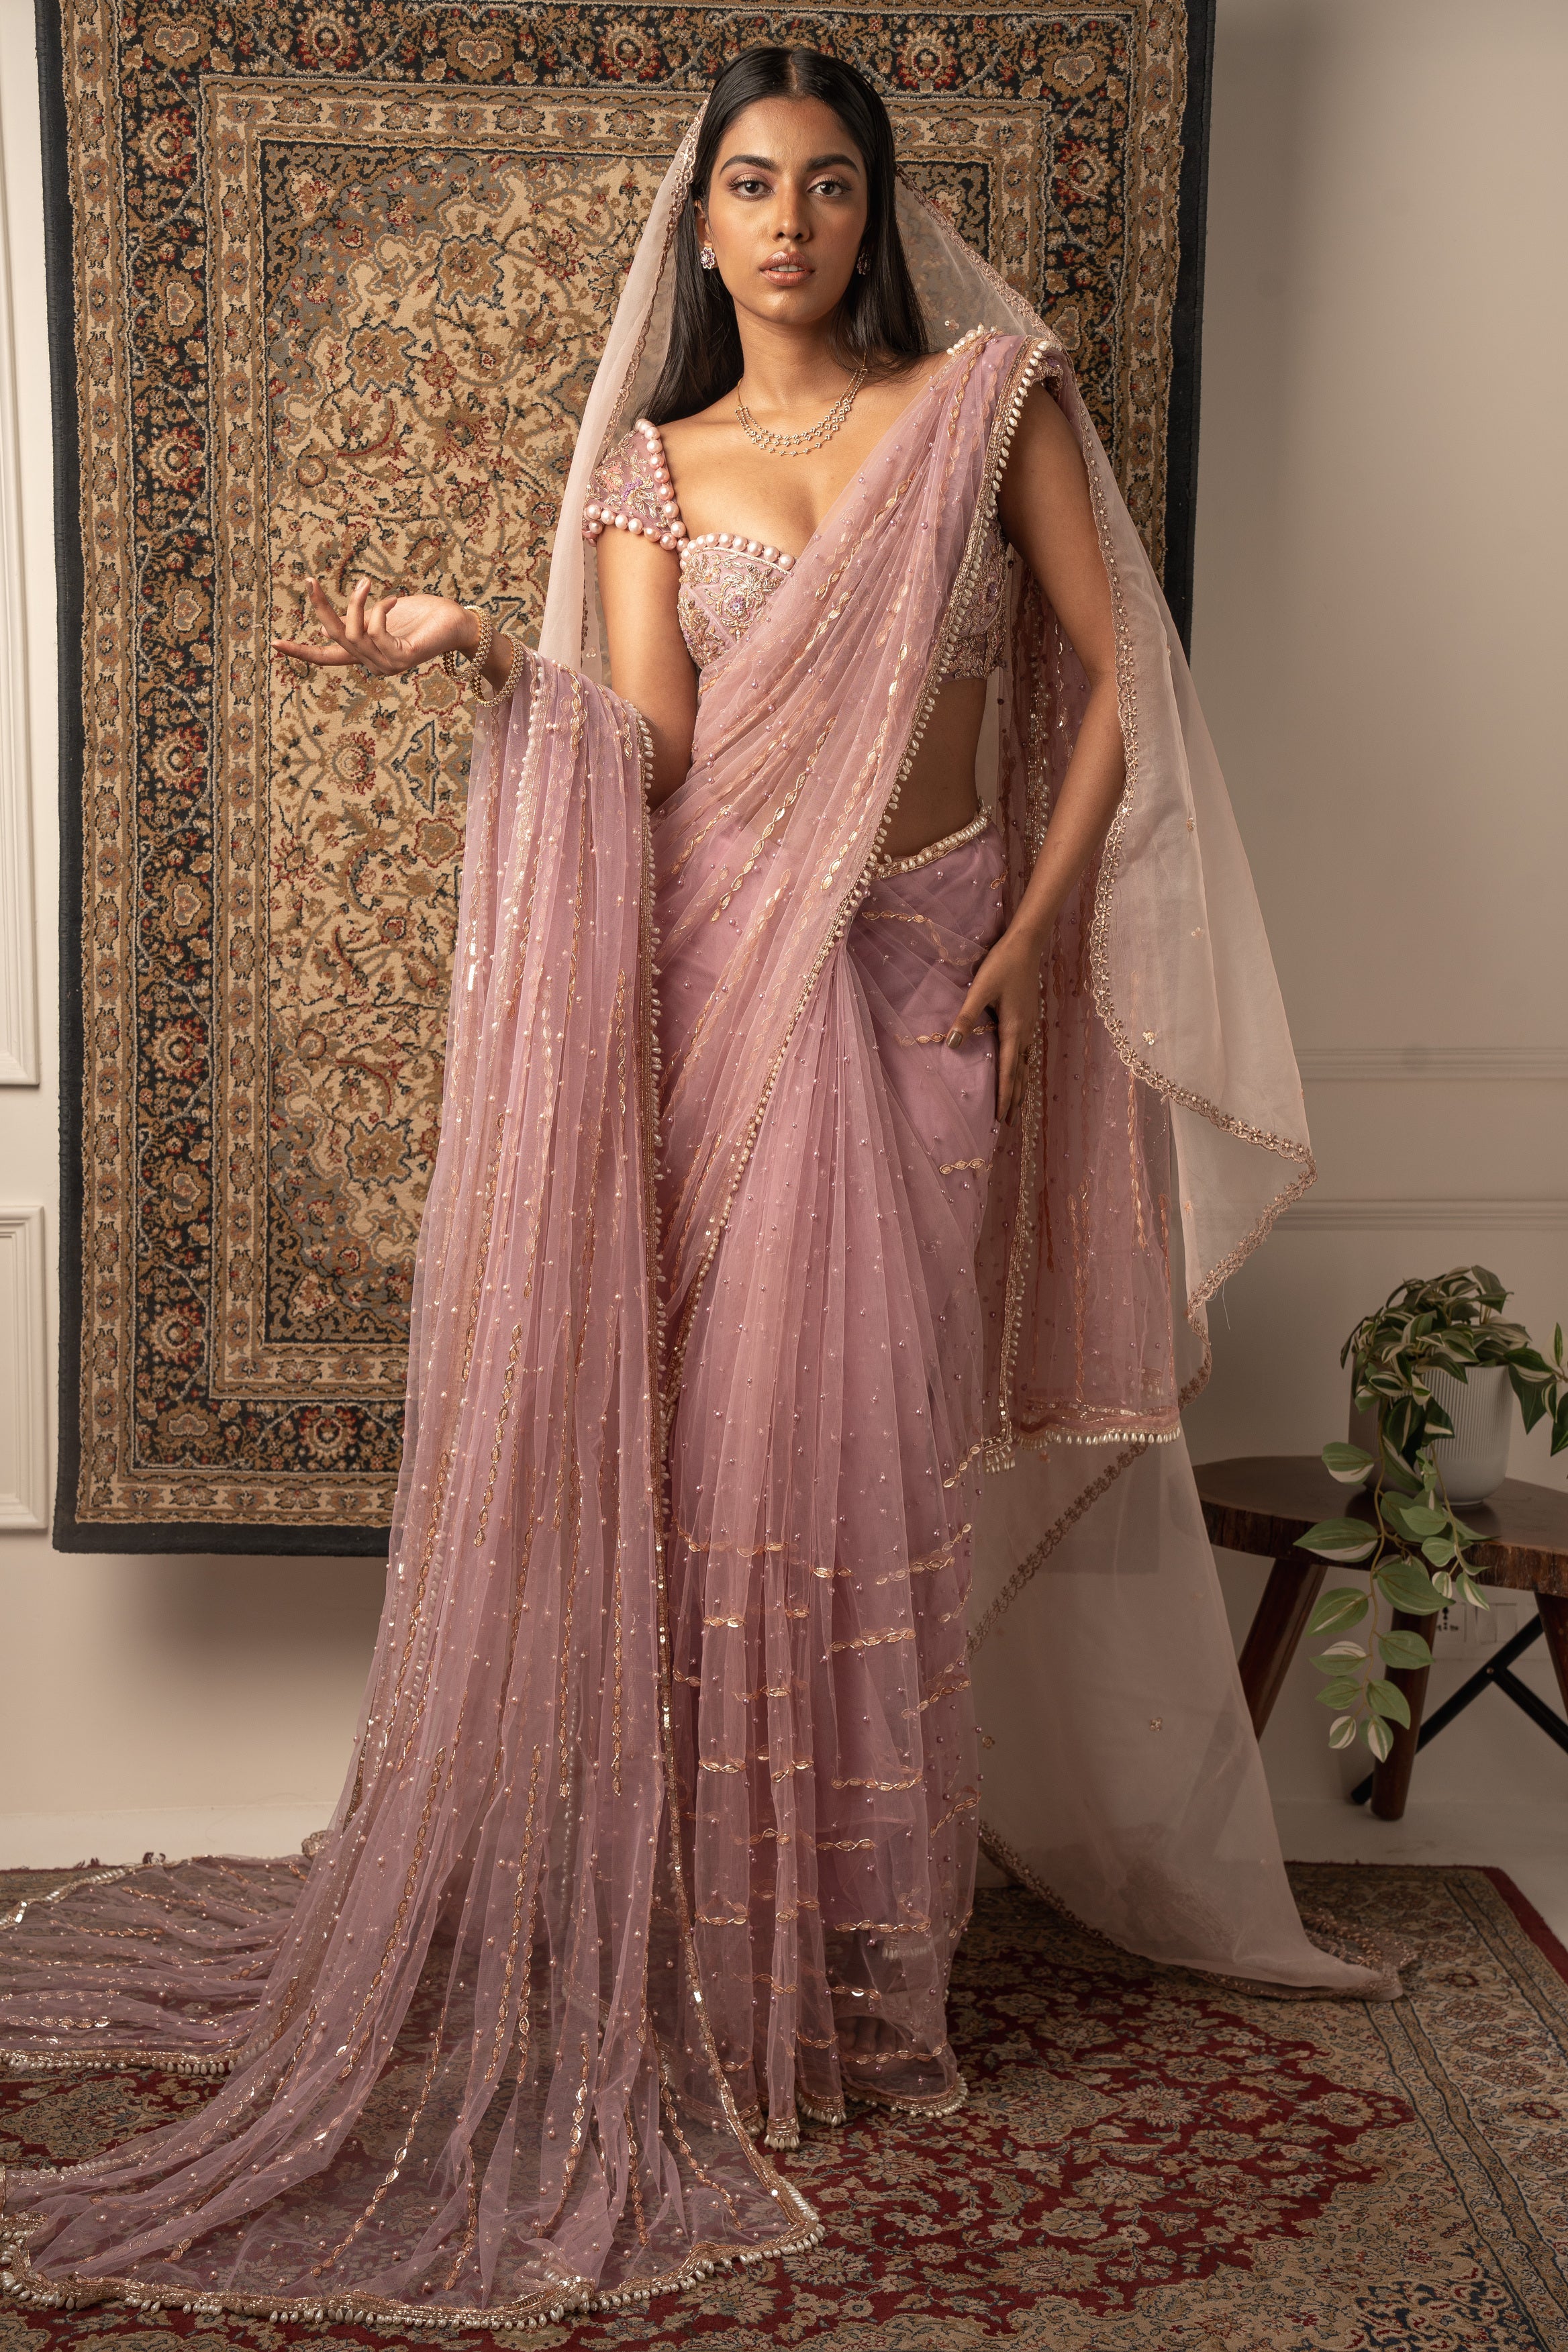 Draped in dreams: Lilac Net Saree with a Velvet and Net blouse, exuding ethereal charm and timeless elegance.